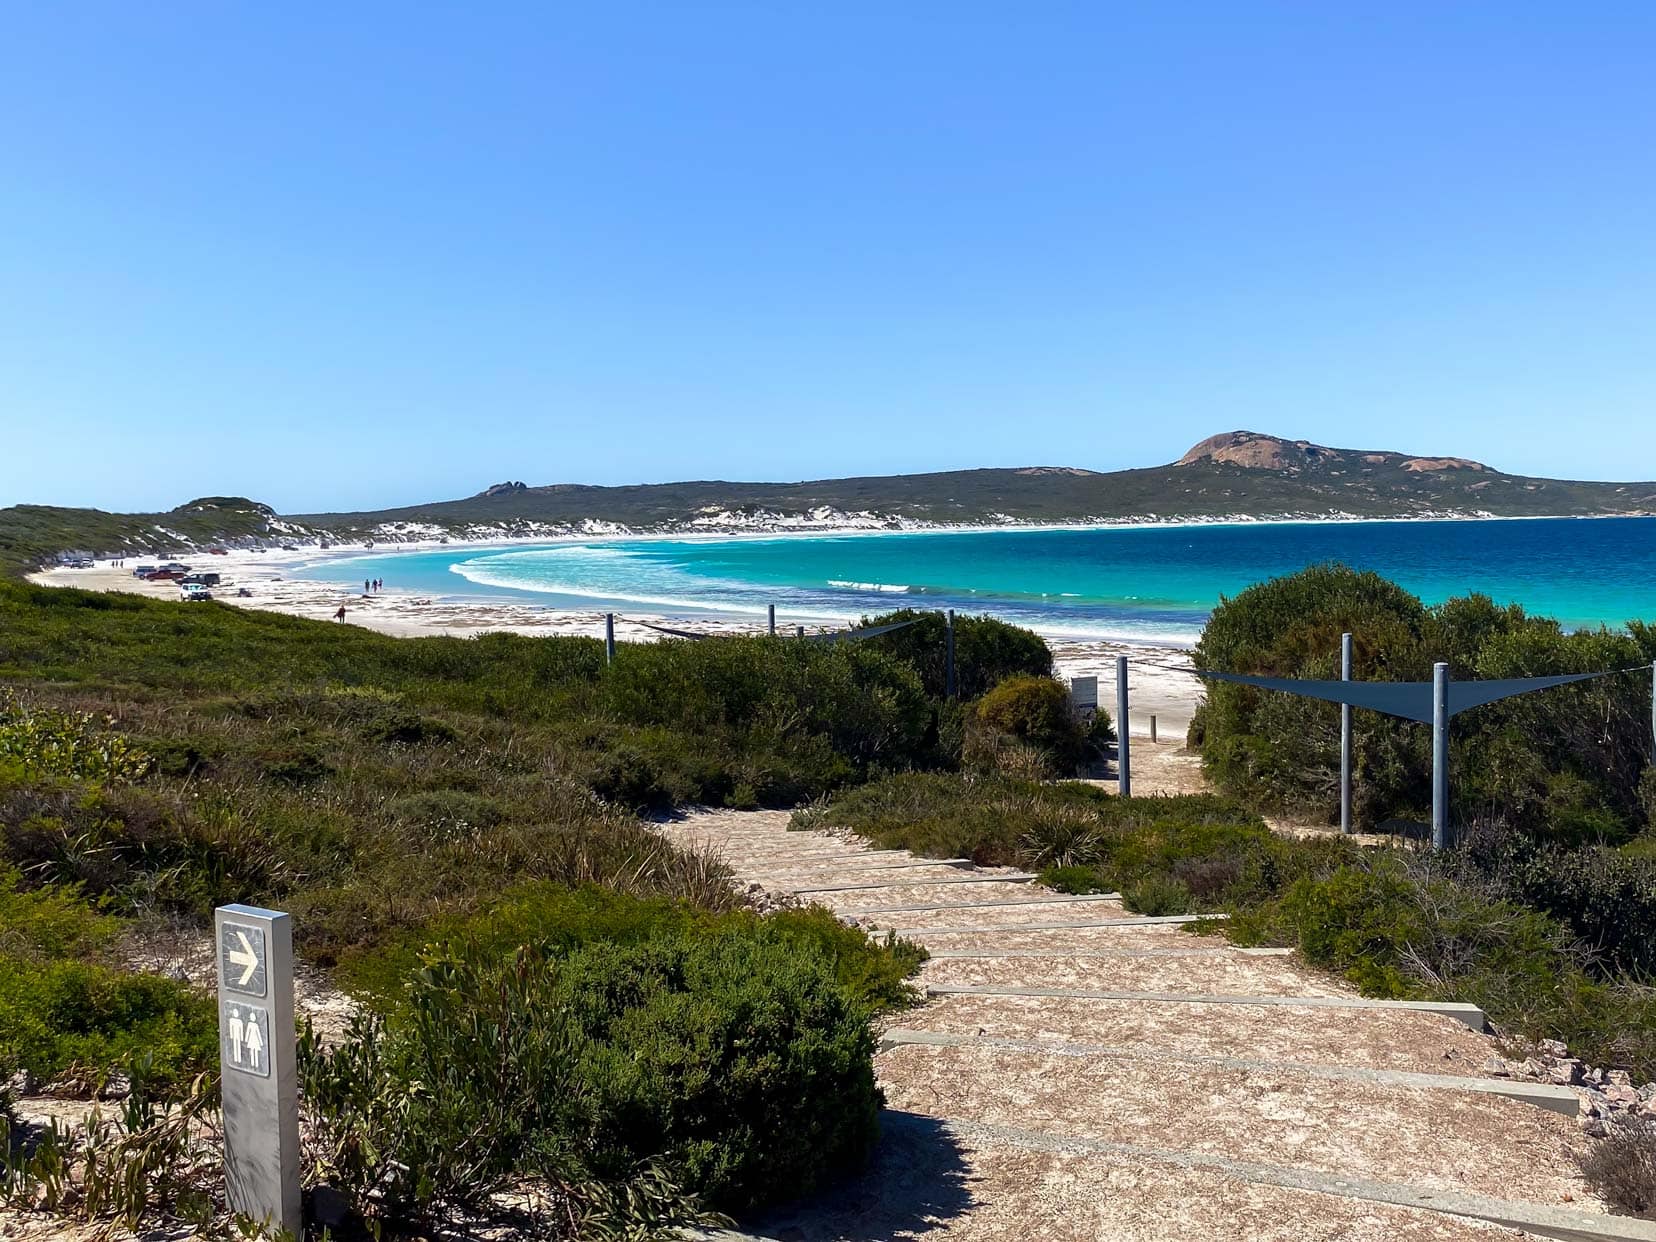 One of the most popular things to do in Esperance is to visit Lucky Bay - a stretch of white sand and 4x4 allowed on the beach 